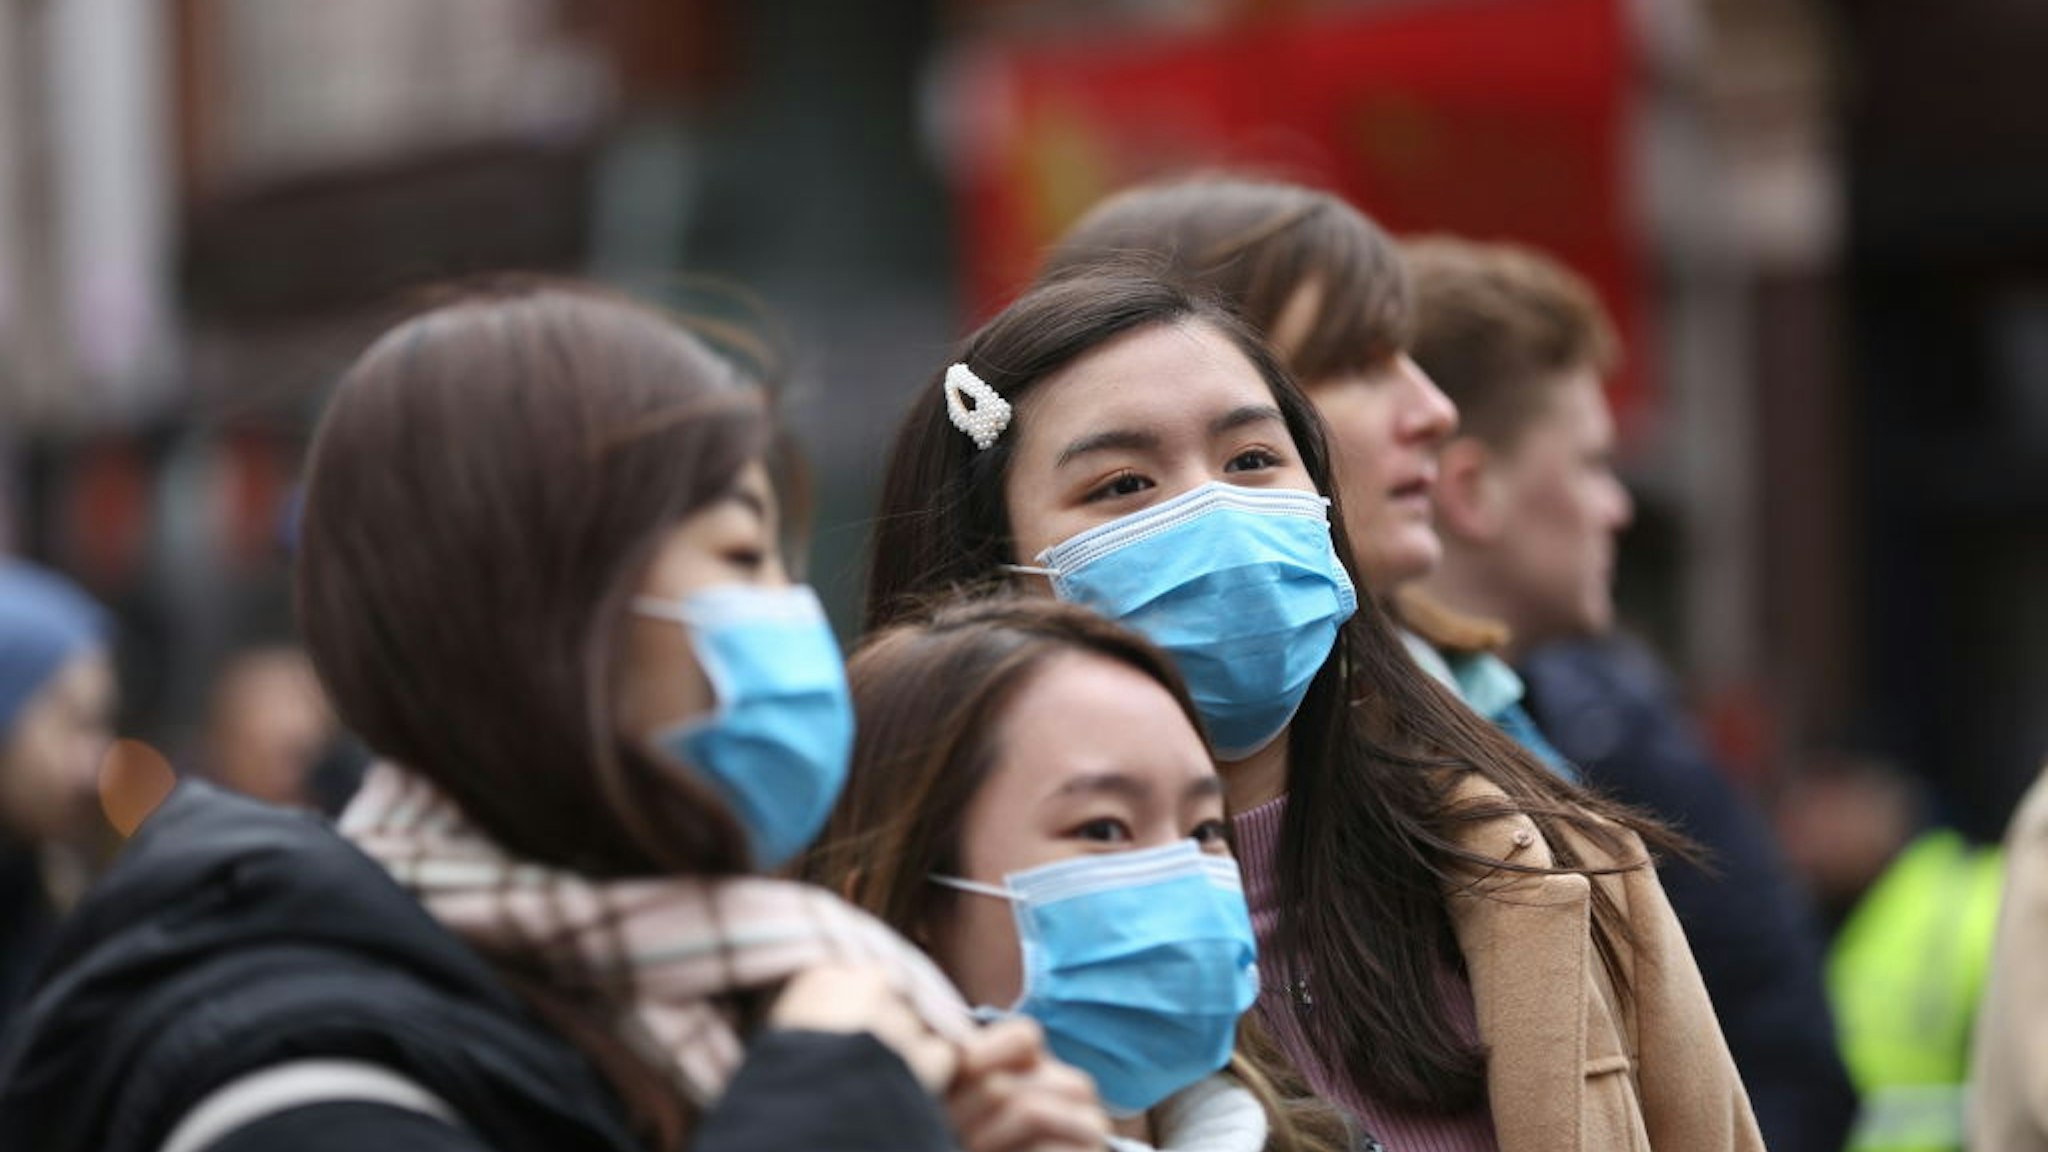 London Chinatown entered the Chinese new year ("year of the rat") in the shadow of coronavirus with pedestrians covering their faces with sanitary masks but celebrations went on in London, England on January 26, 2020.